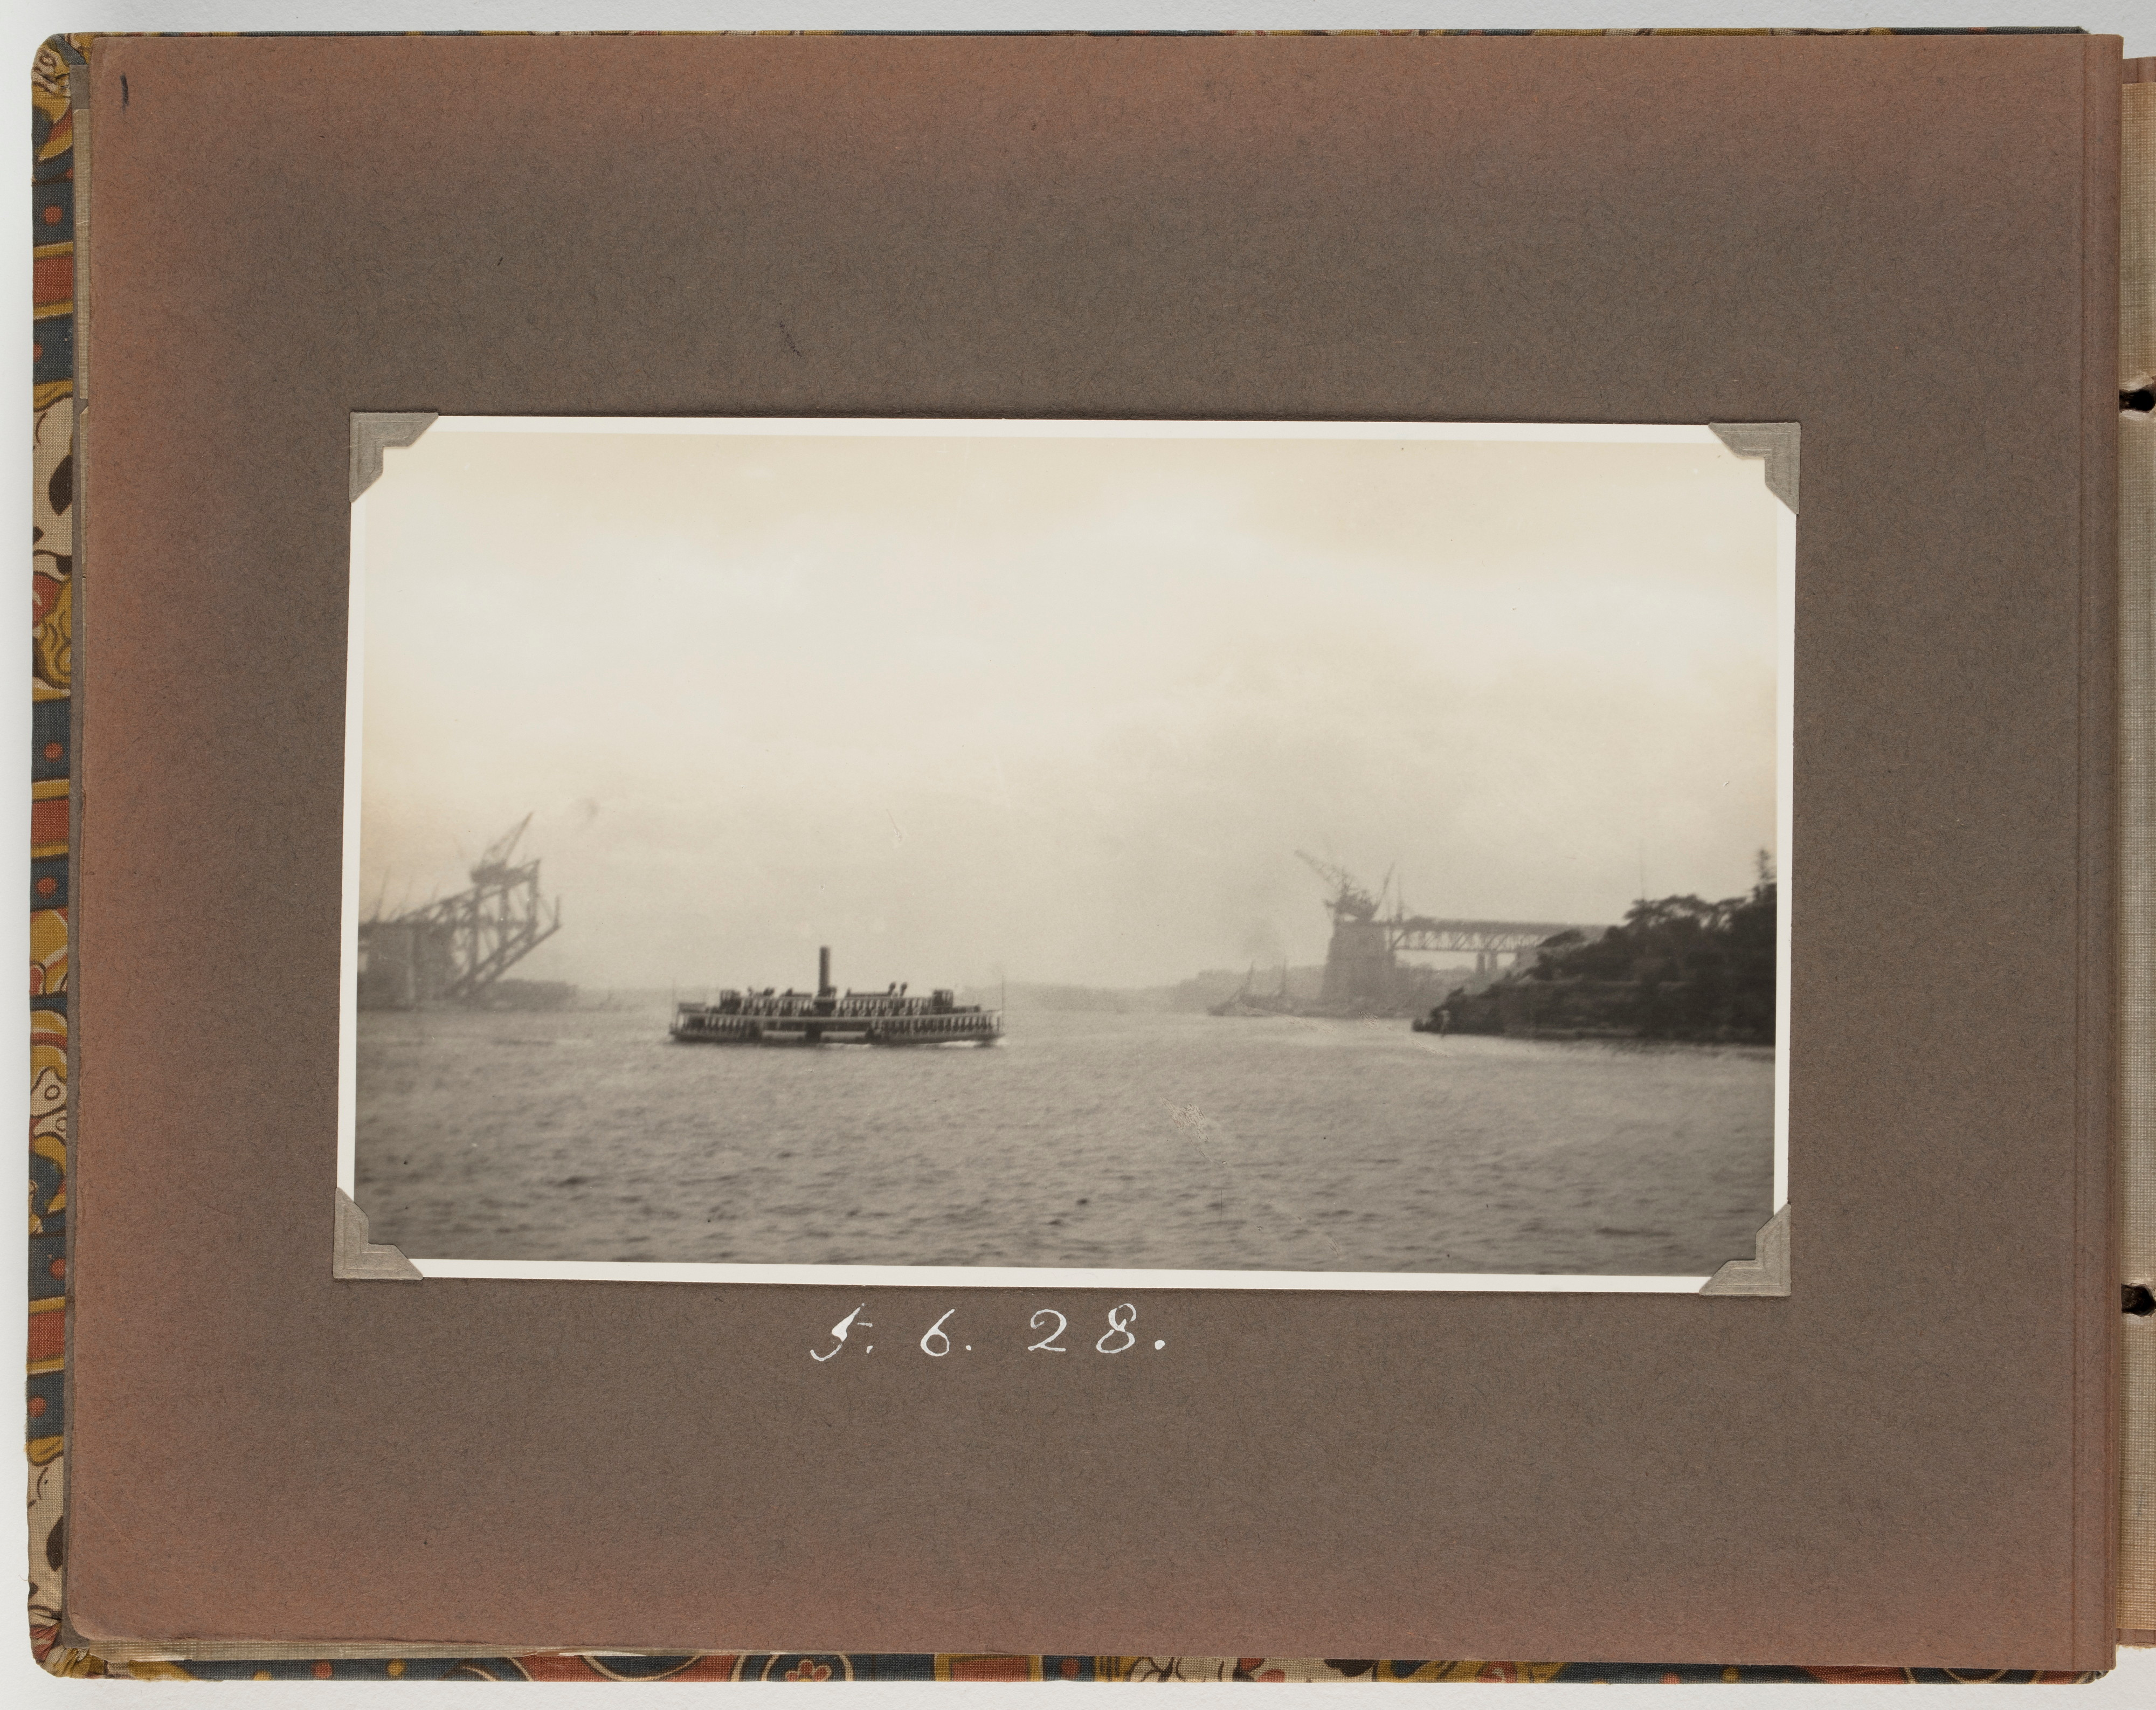 First photo, Bridge approaches with creeper cranes in position, 5/6/28